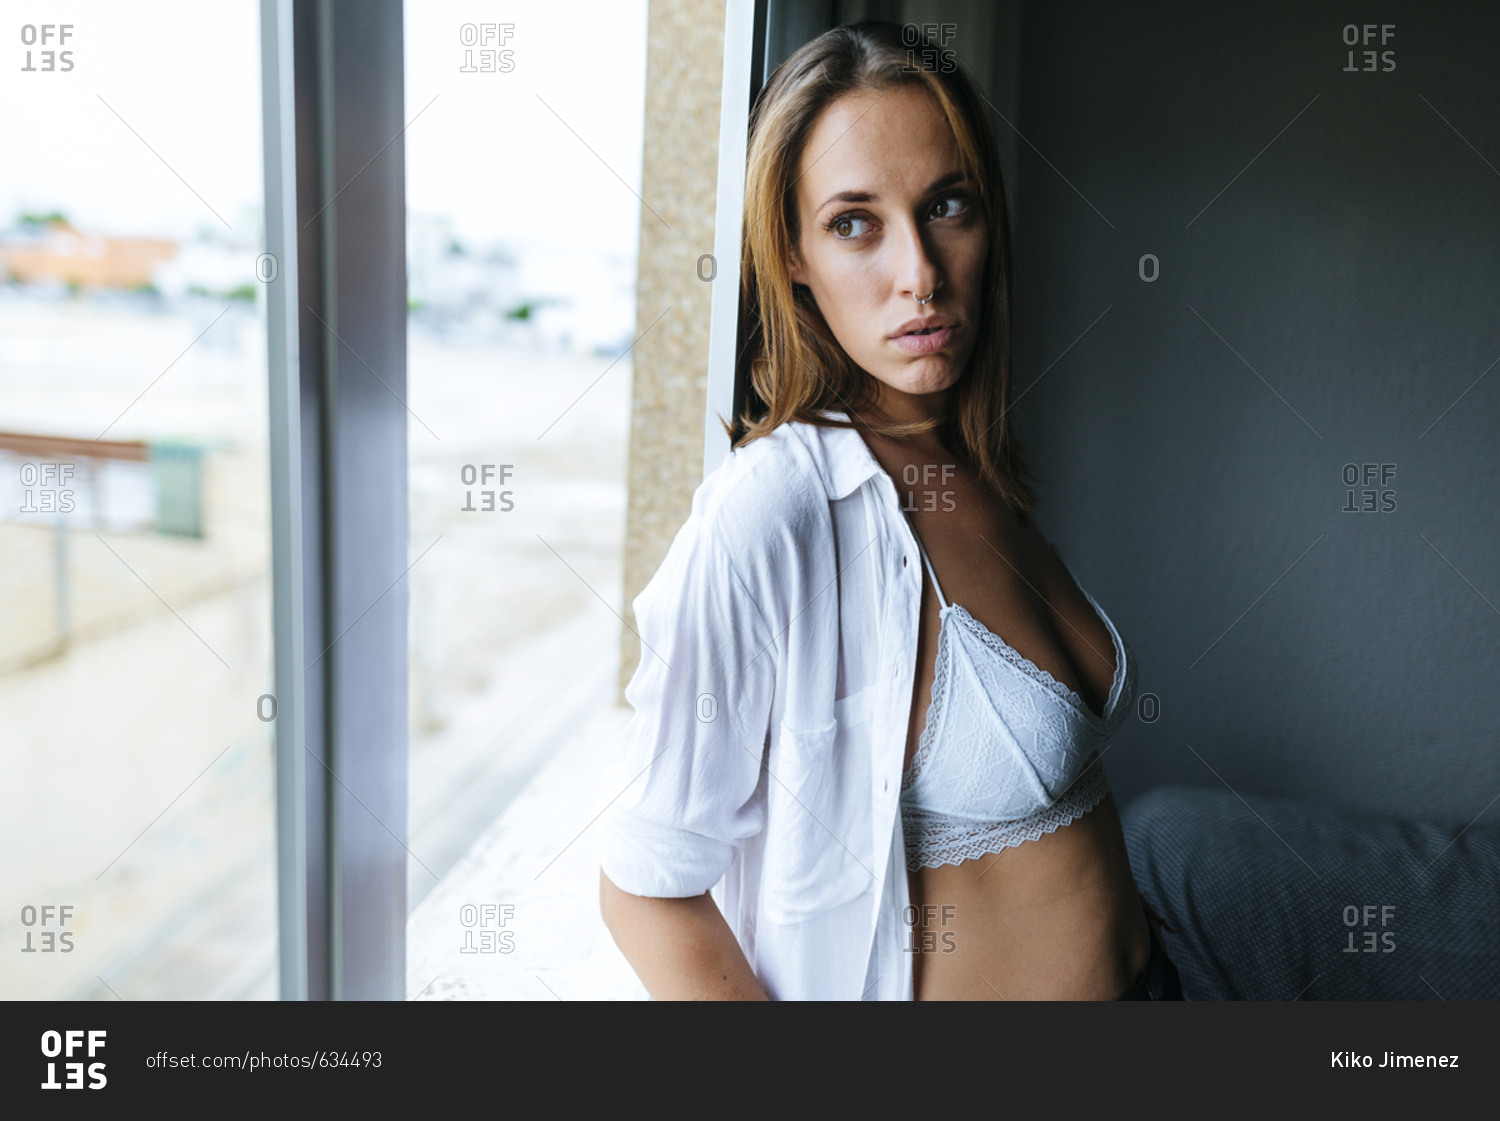 Woman looking out window with open blouse